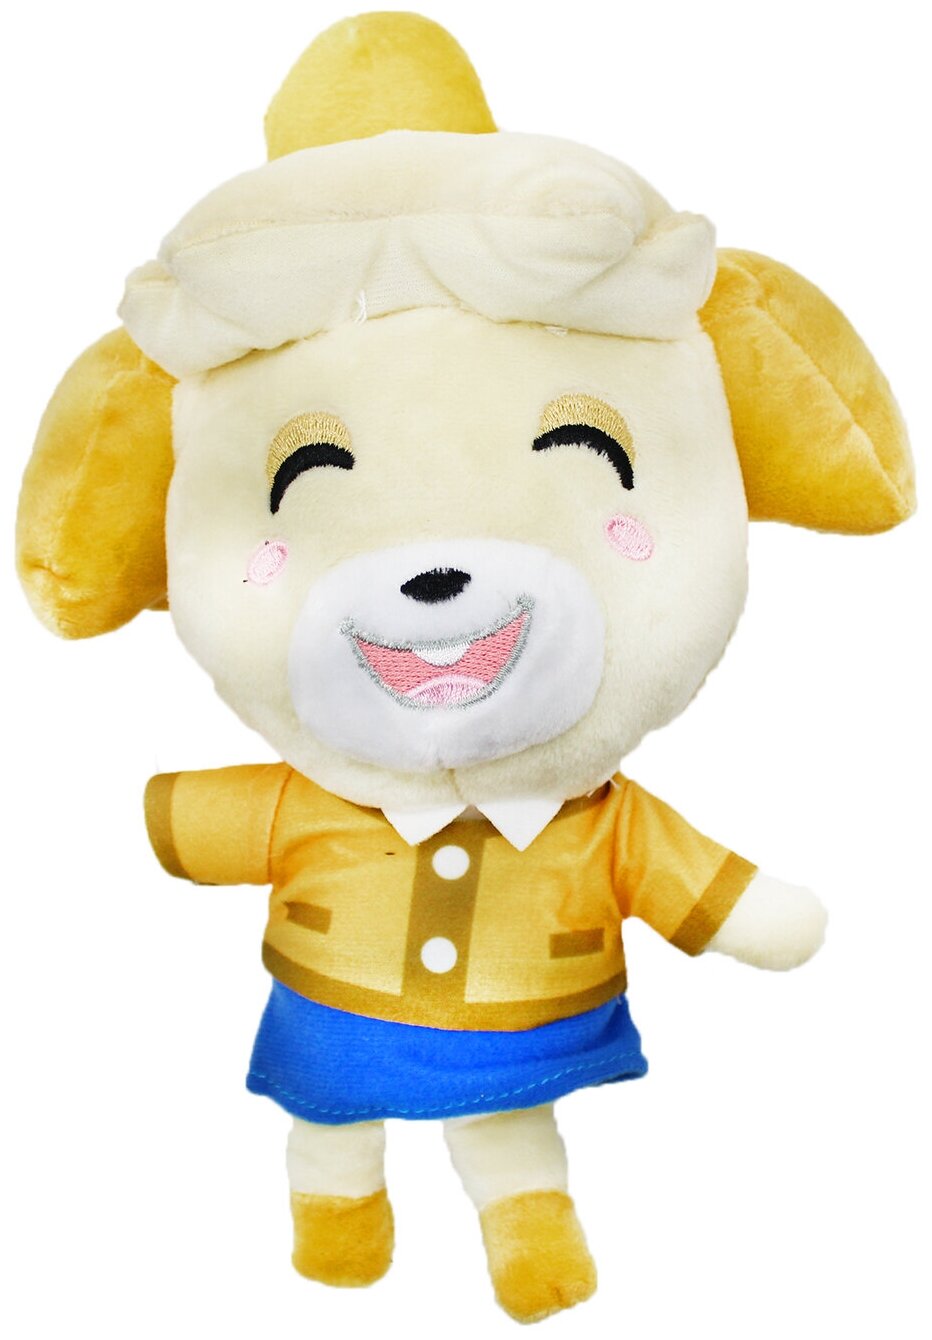 Crossing isabelle animal It's Time